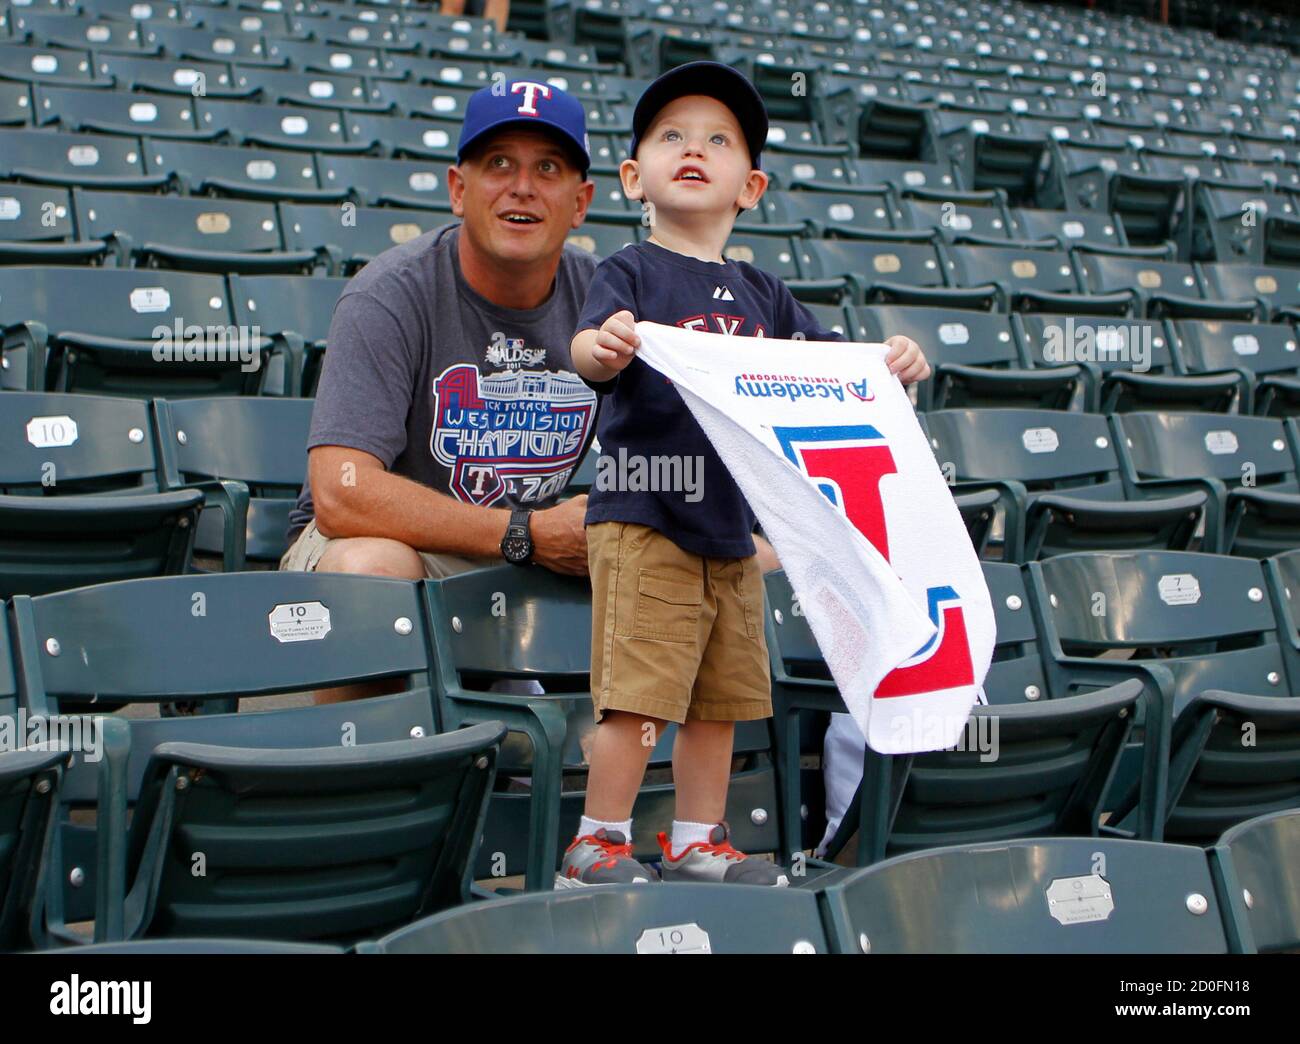 Texas Rangers fans Jake Seymour and his son, W.K. Seymour, 3 years old, await the start of Game 1 of the MLB American League Championship Series baseball playoffs against the Detroit Tigers in Arlington, Texas, October 8, 2011. REUTERS/Danny Moloshok (UNITED STATES  - Tags: SPORT BASEBALL) Stock Photo